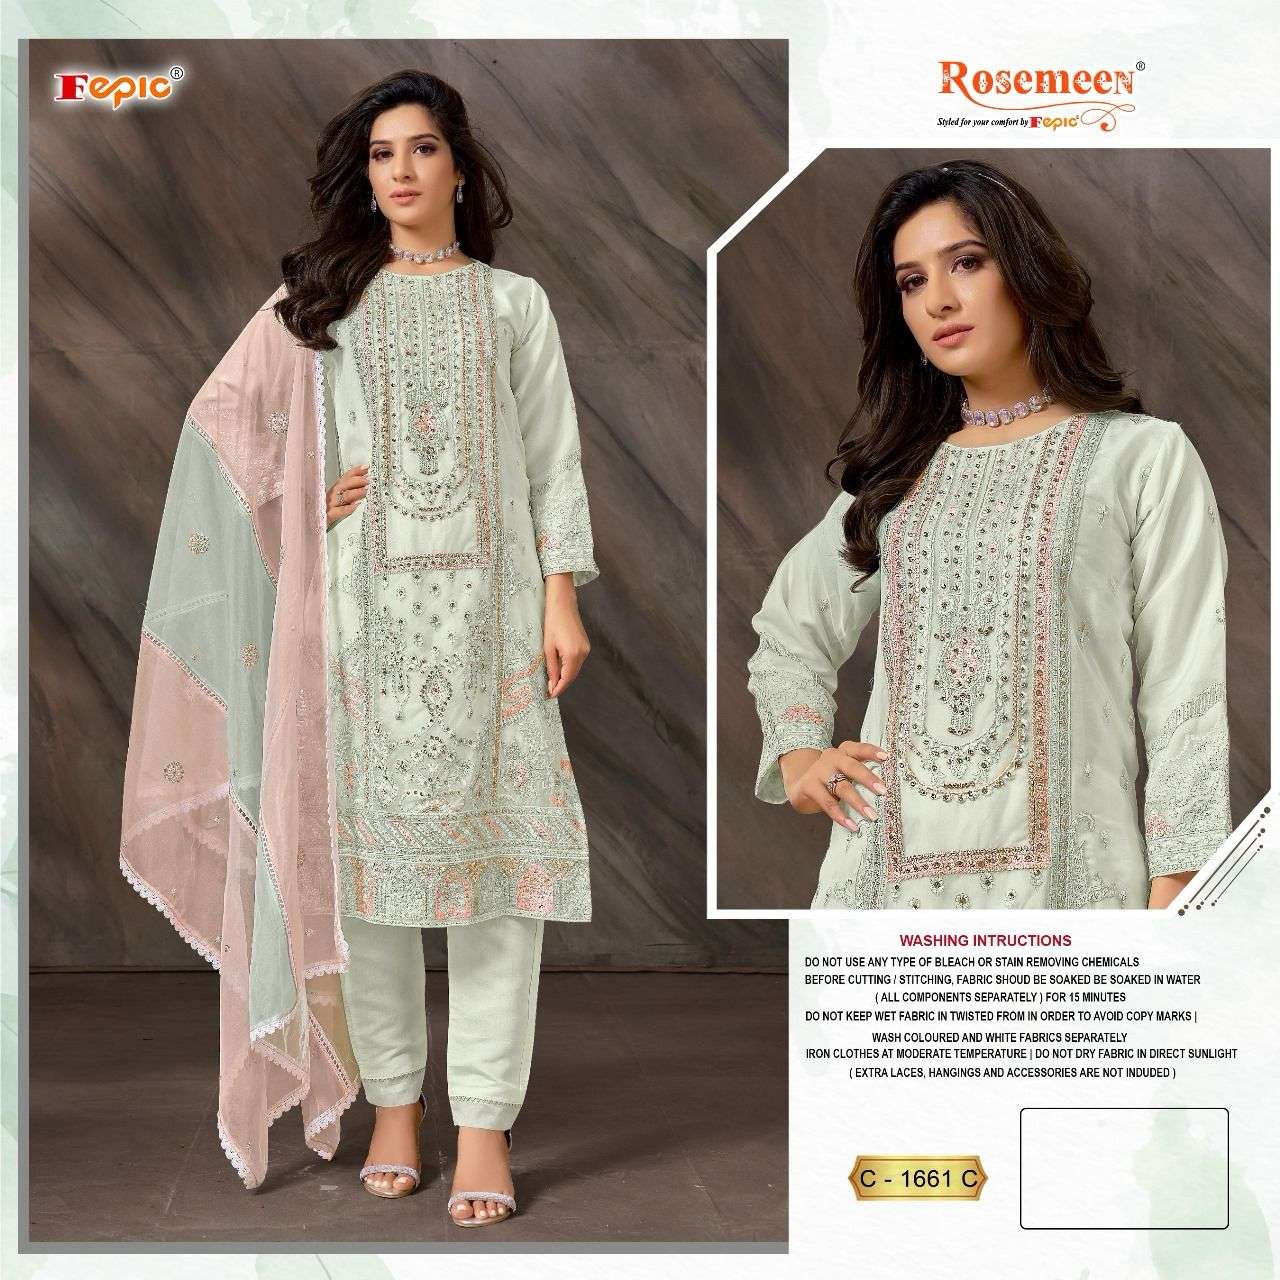 Fepic Rosemeen 1661 Organza With embroidery work Pakistani s...